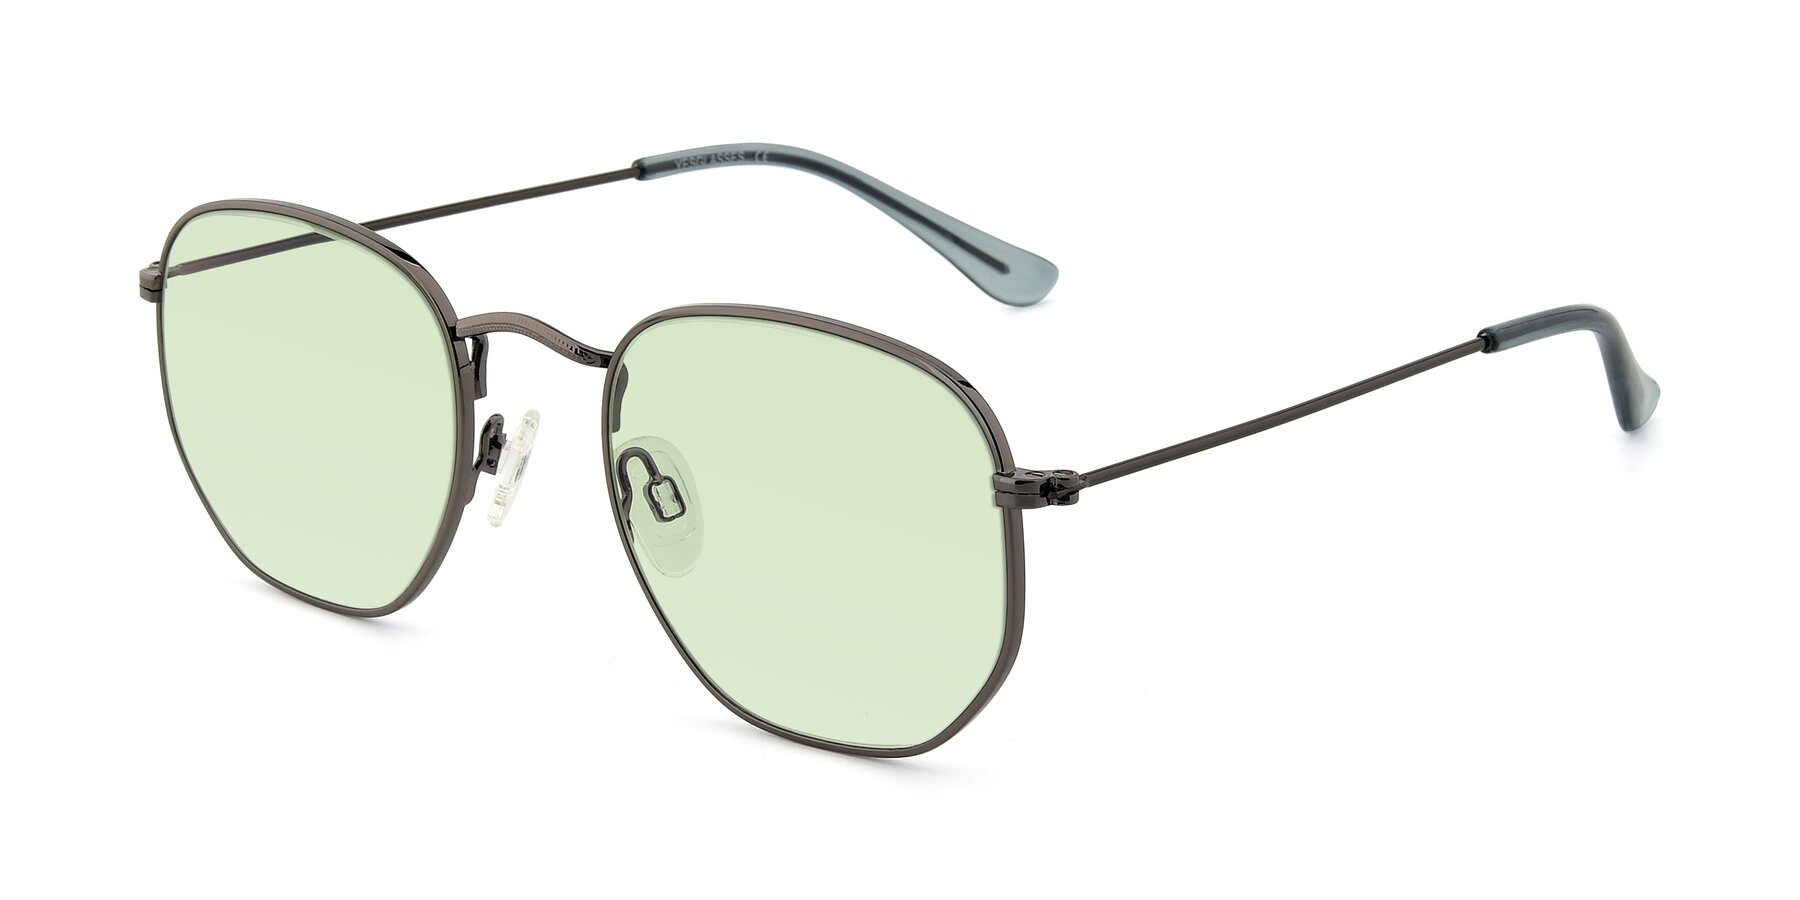 Angle of SSR1944 in Grey with Light Green Tinted Lenses